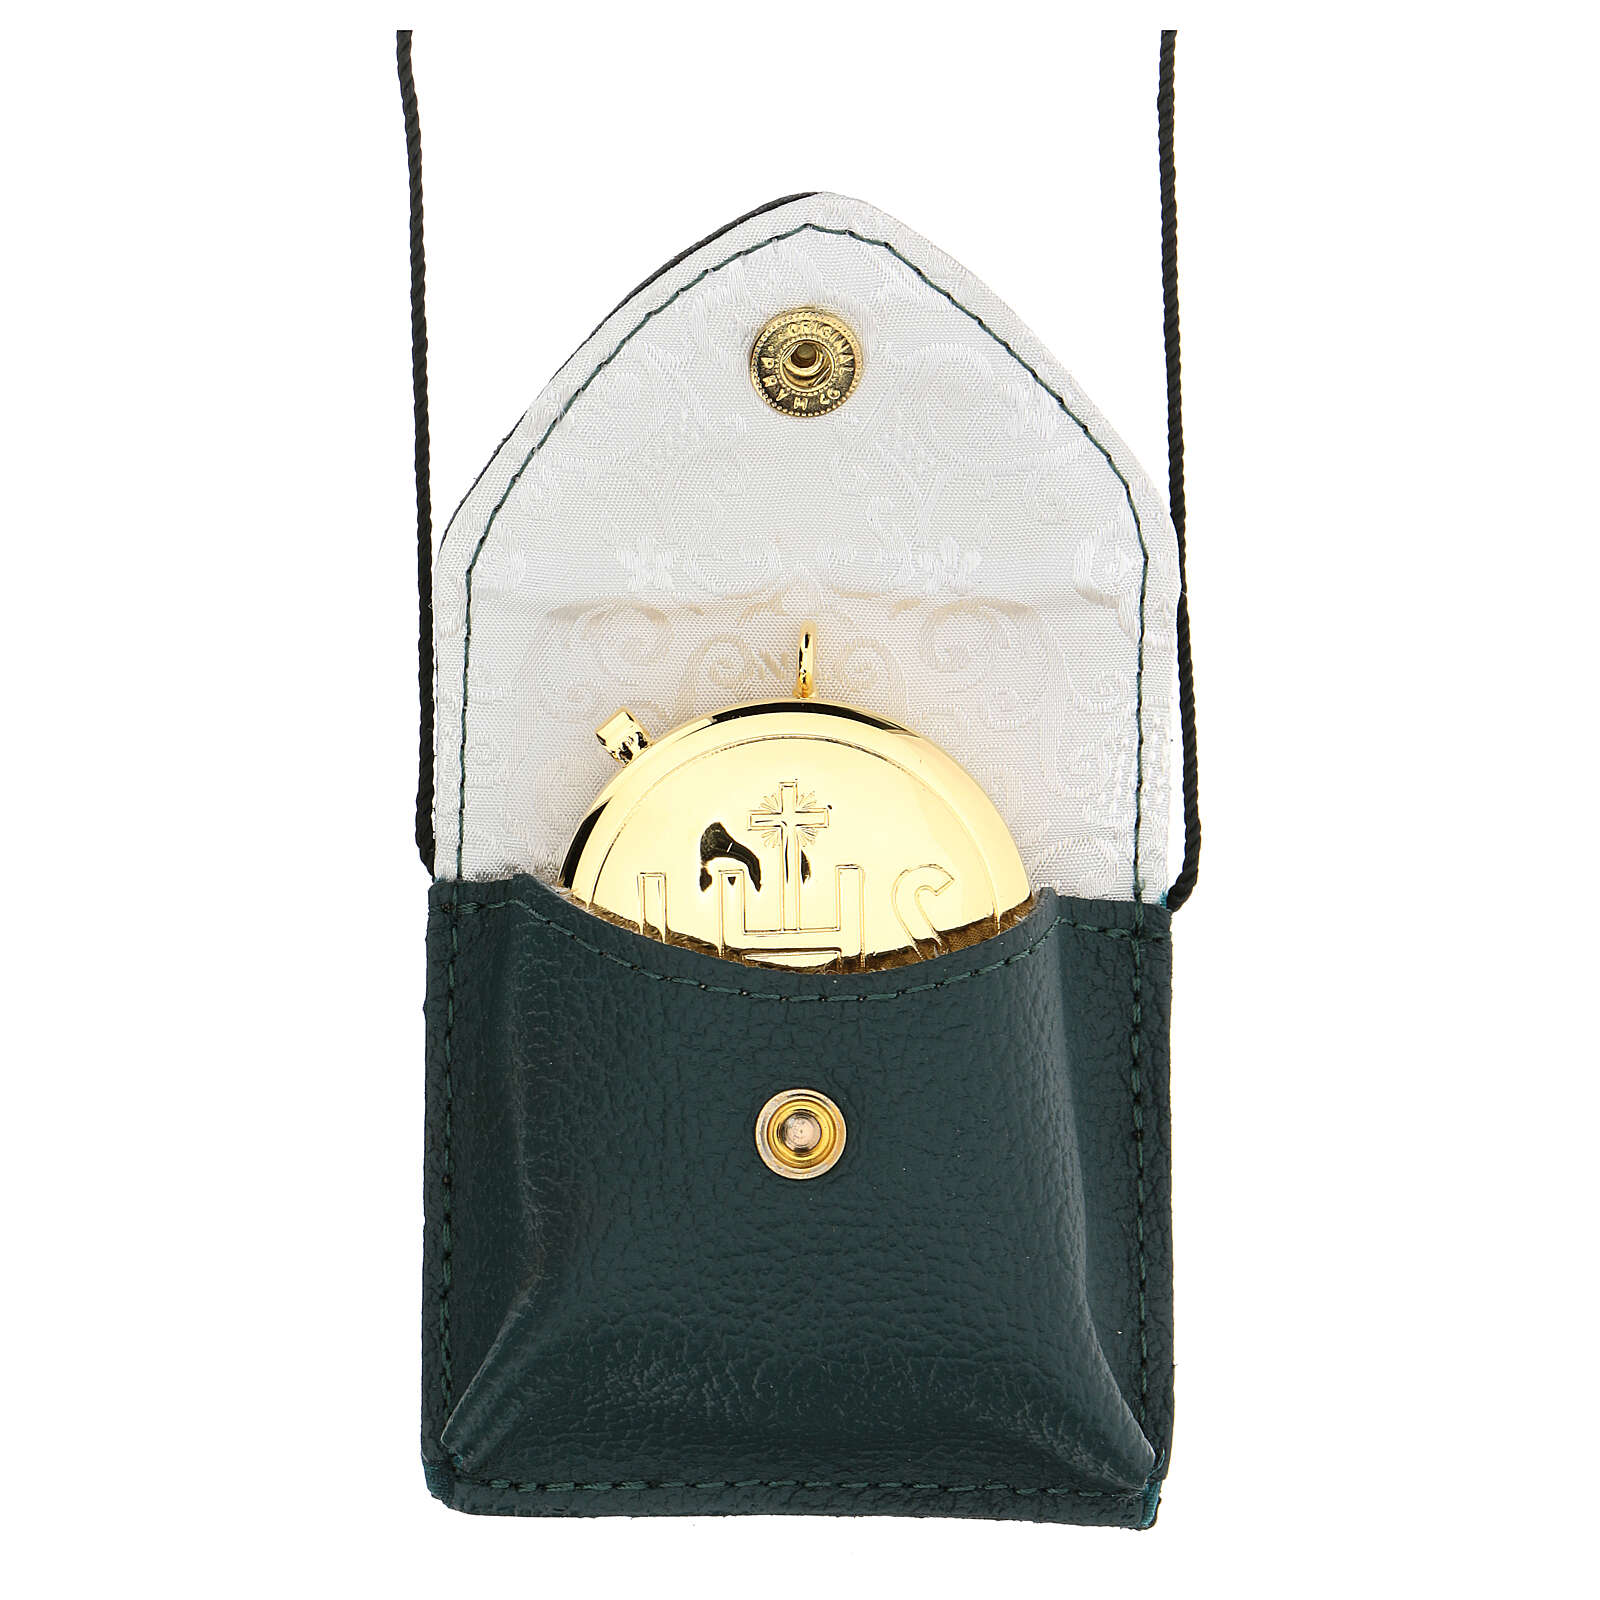 Pyx with green leather bag | online sales on HOLYART.co.uk